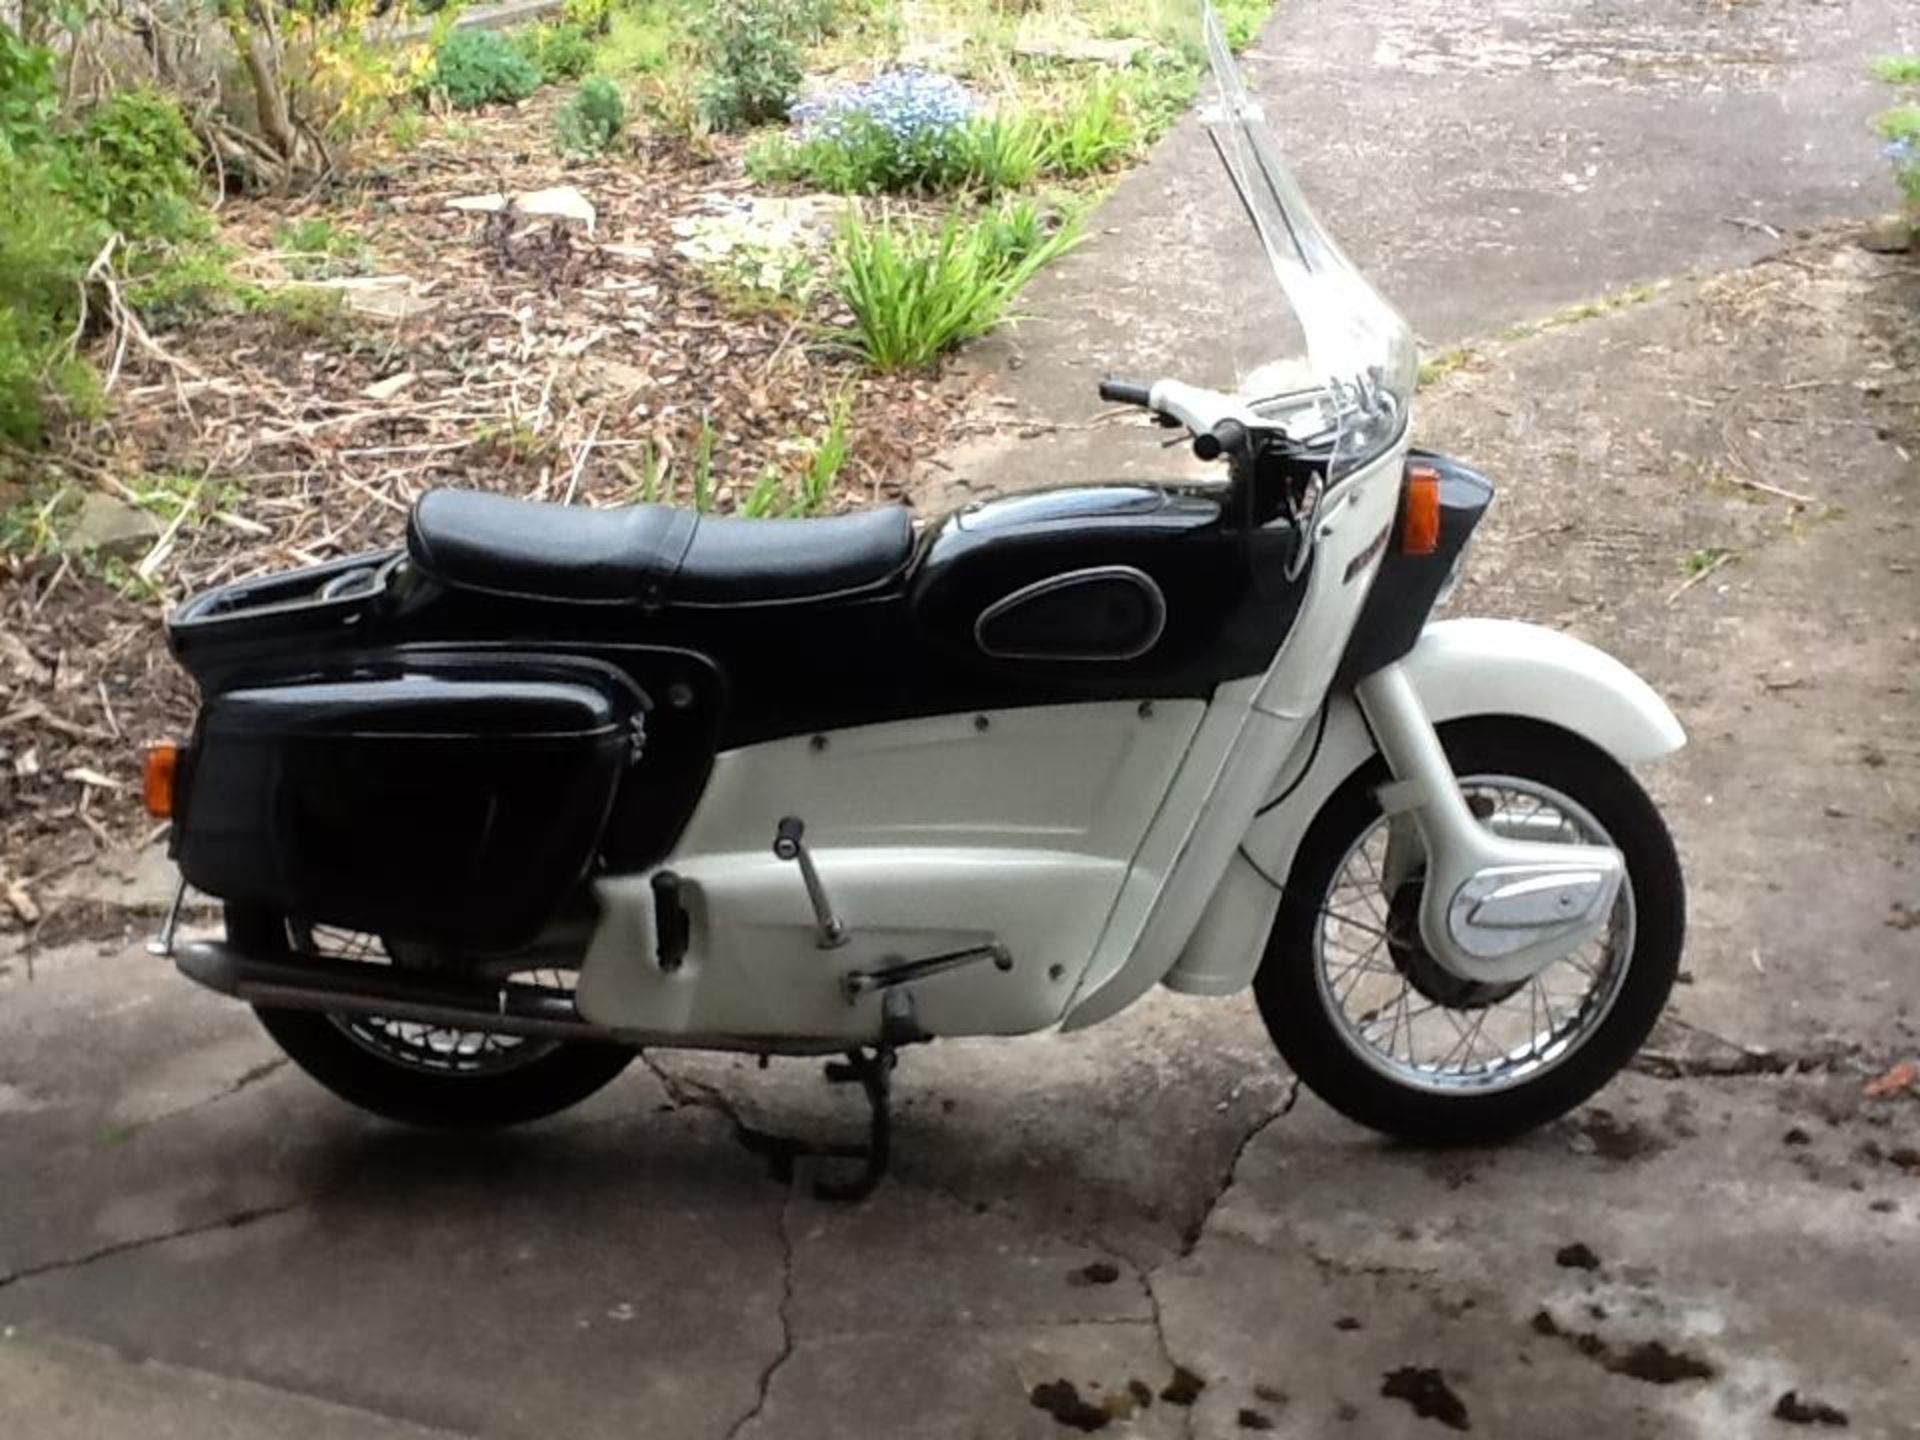 A 1962 ARIEL LEADER MOTORCYCLE, 250 CC, REGISTRATION UMS 880. THE FRAME AND ENGINE NUMBERS MATCH